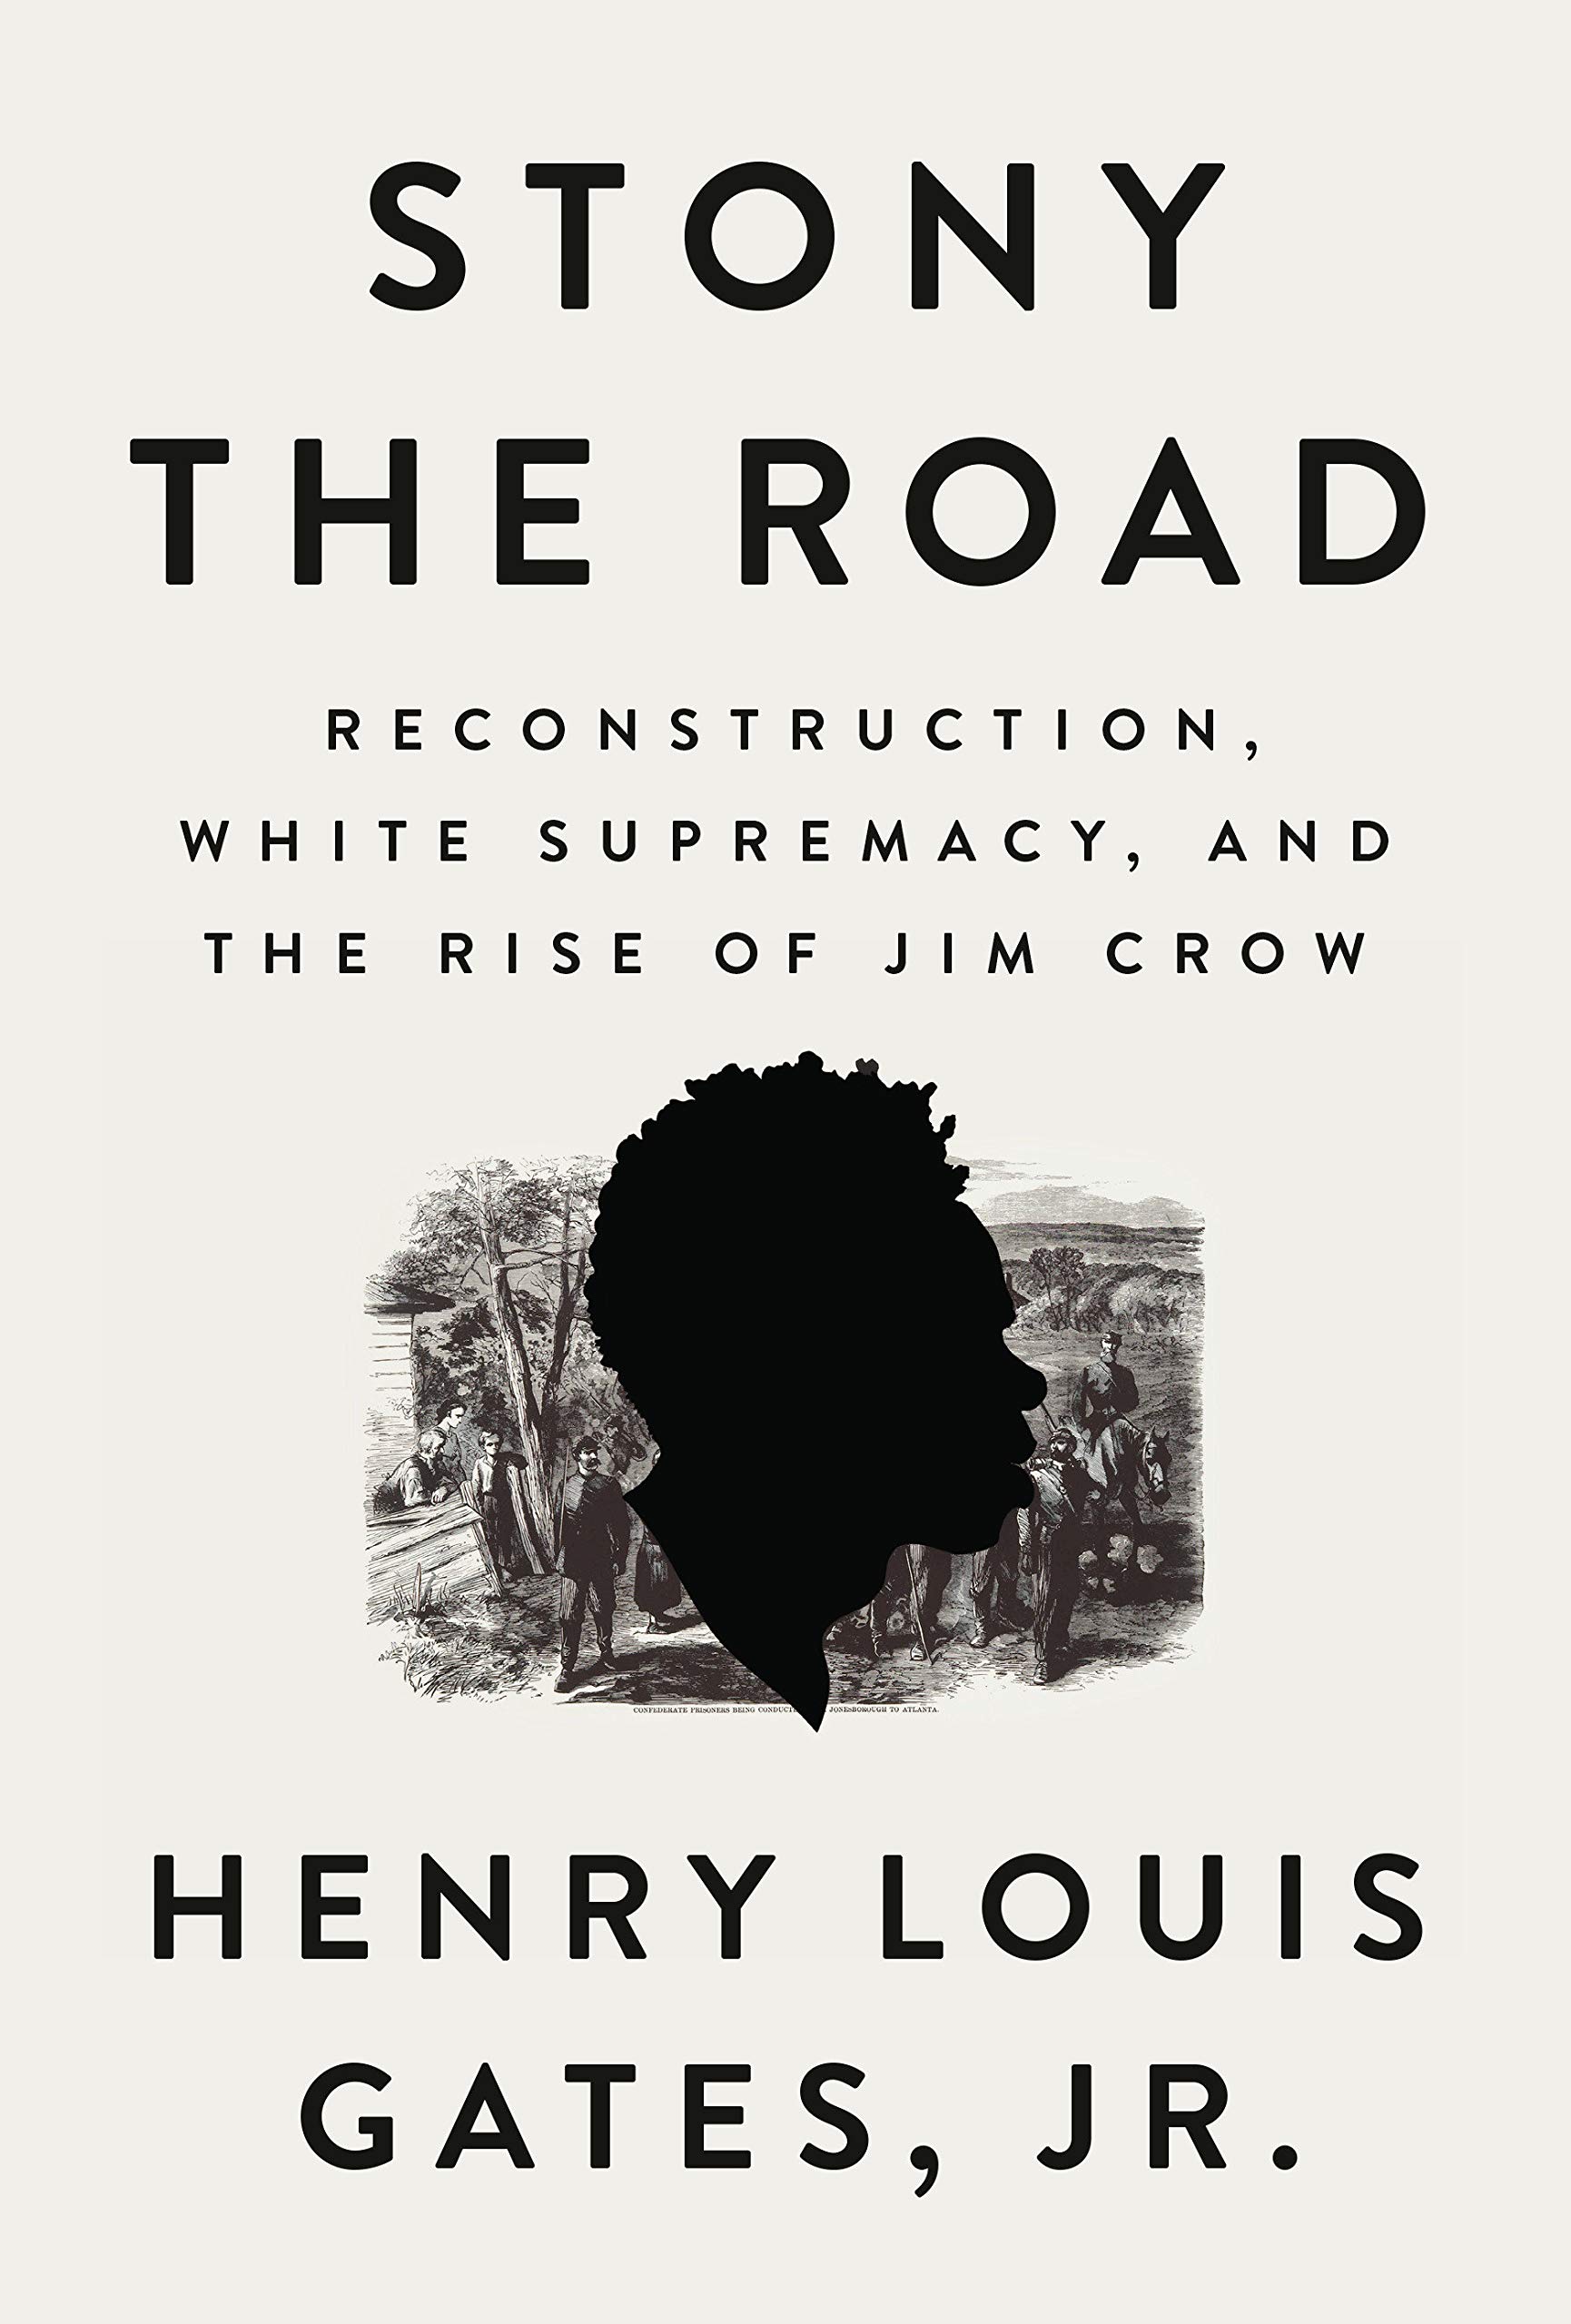 stony the road by henry louis gates jr